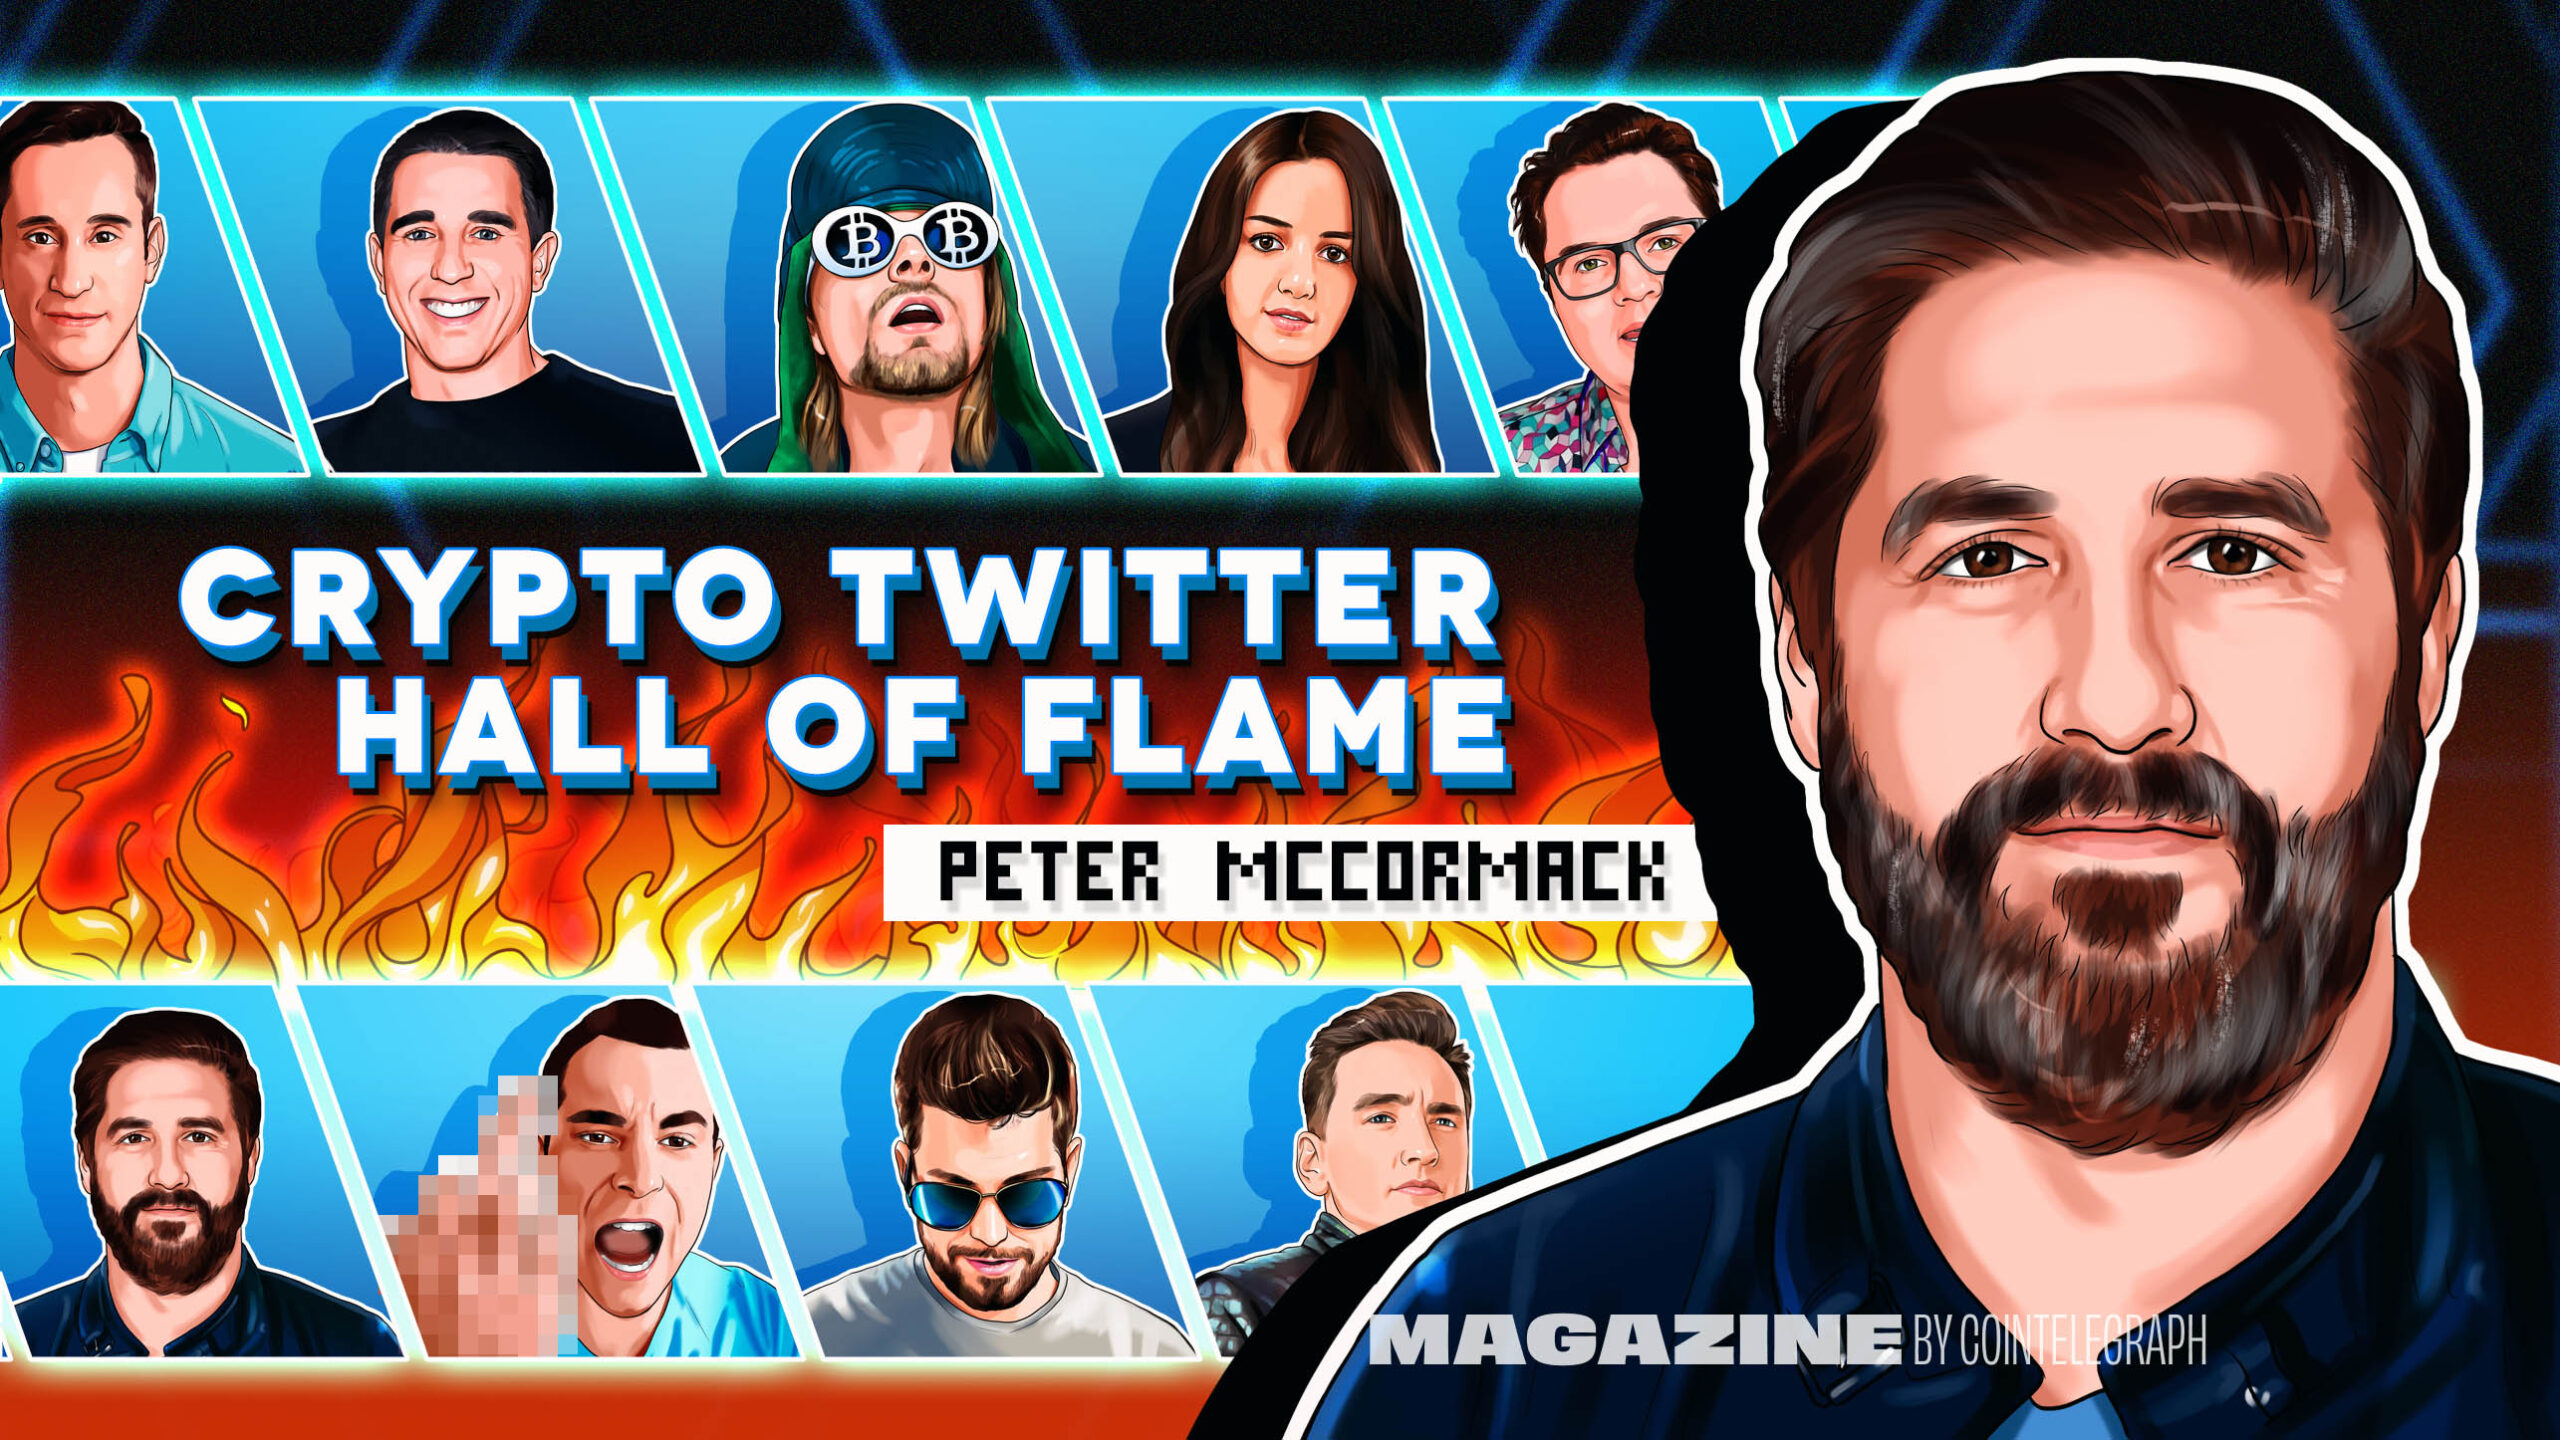 Peter-mccormack’s-twitter-regrets:-‘i-can-feel-myself-being-a-dick’-—-hall-of-flame